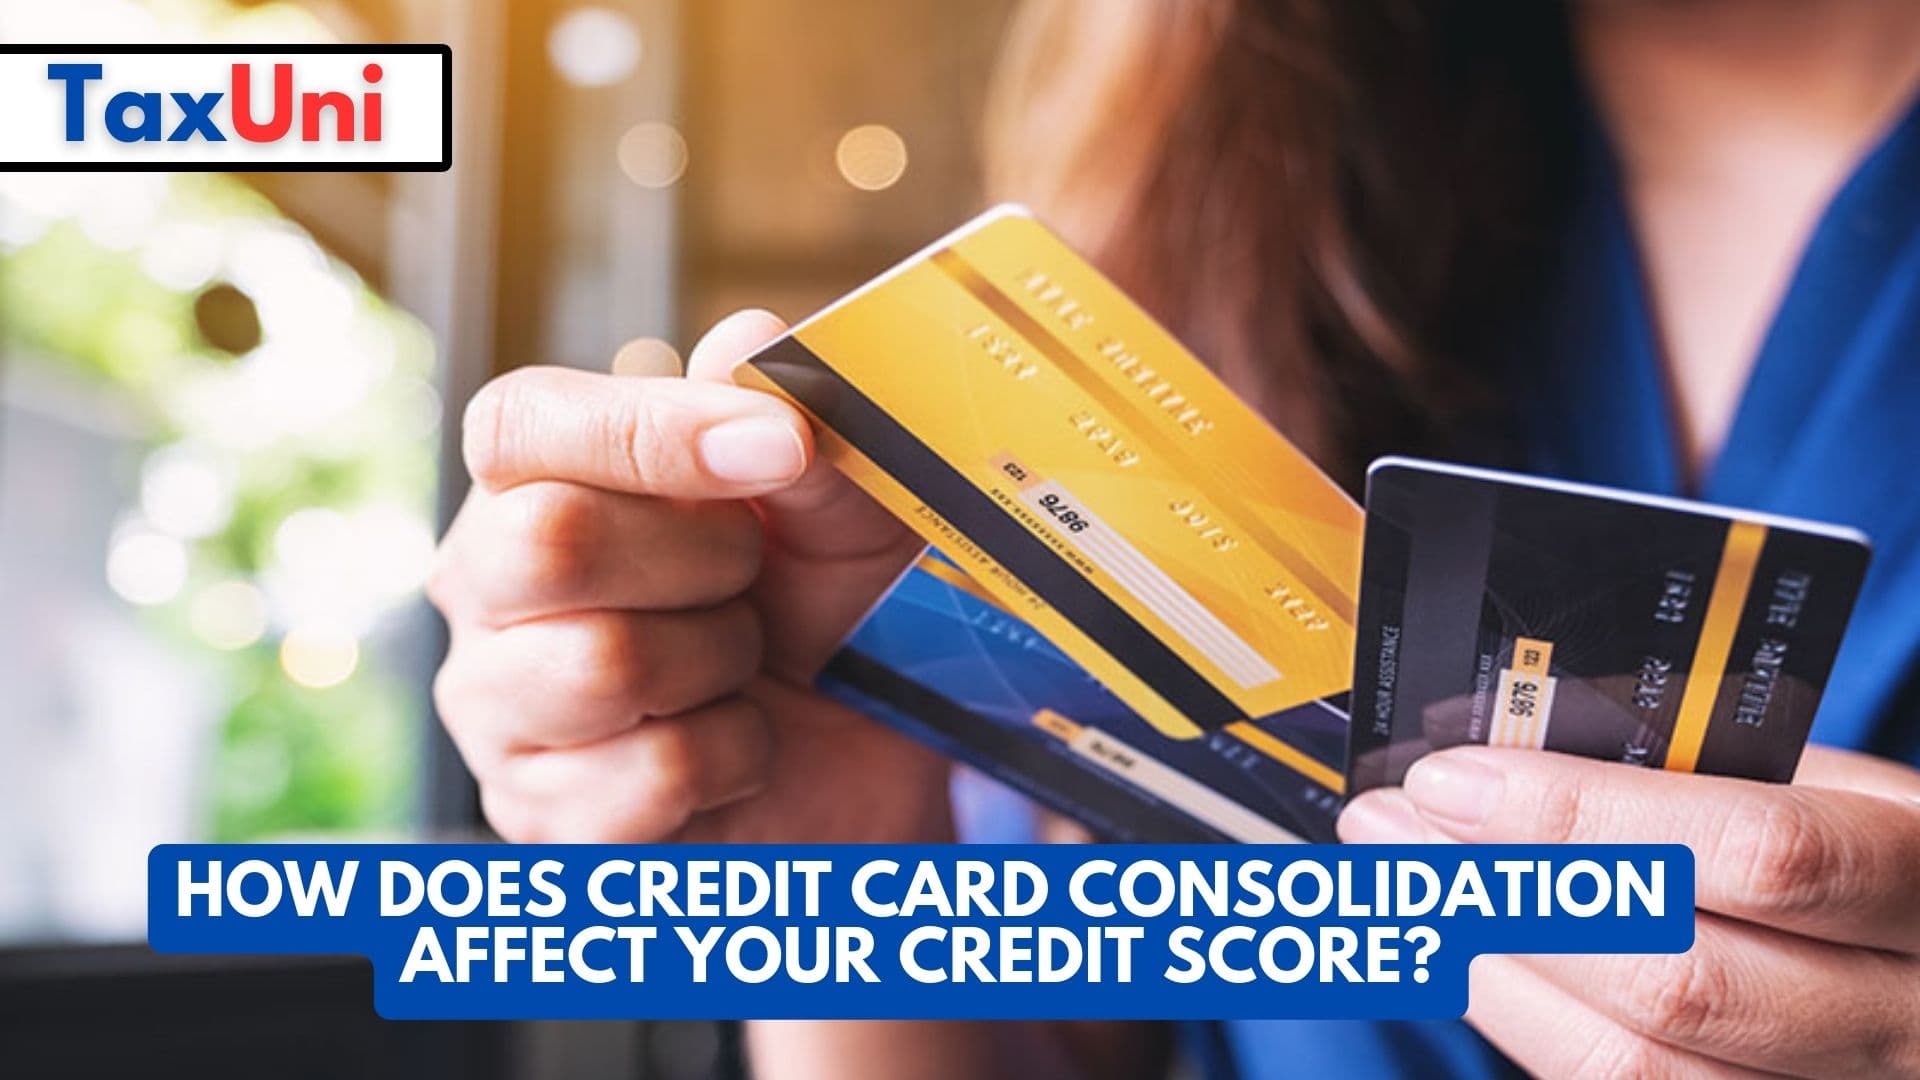 How Does Credit Card Consolidation Affect Your Credit Score